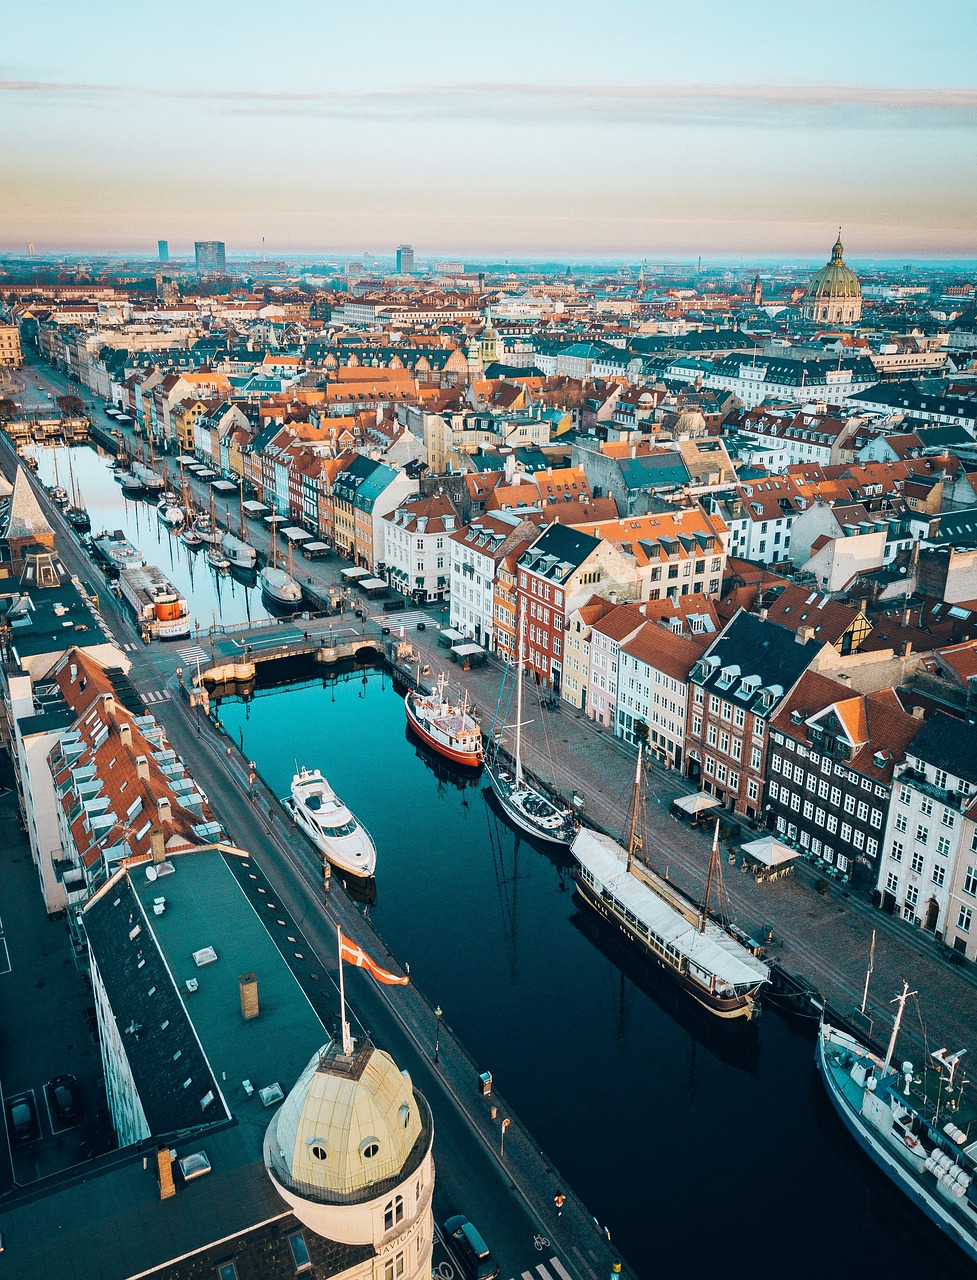 5-Day Cultural and Culinary Journey in Copenhagen